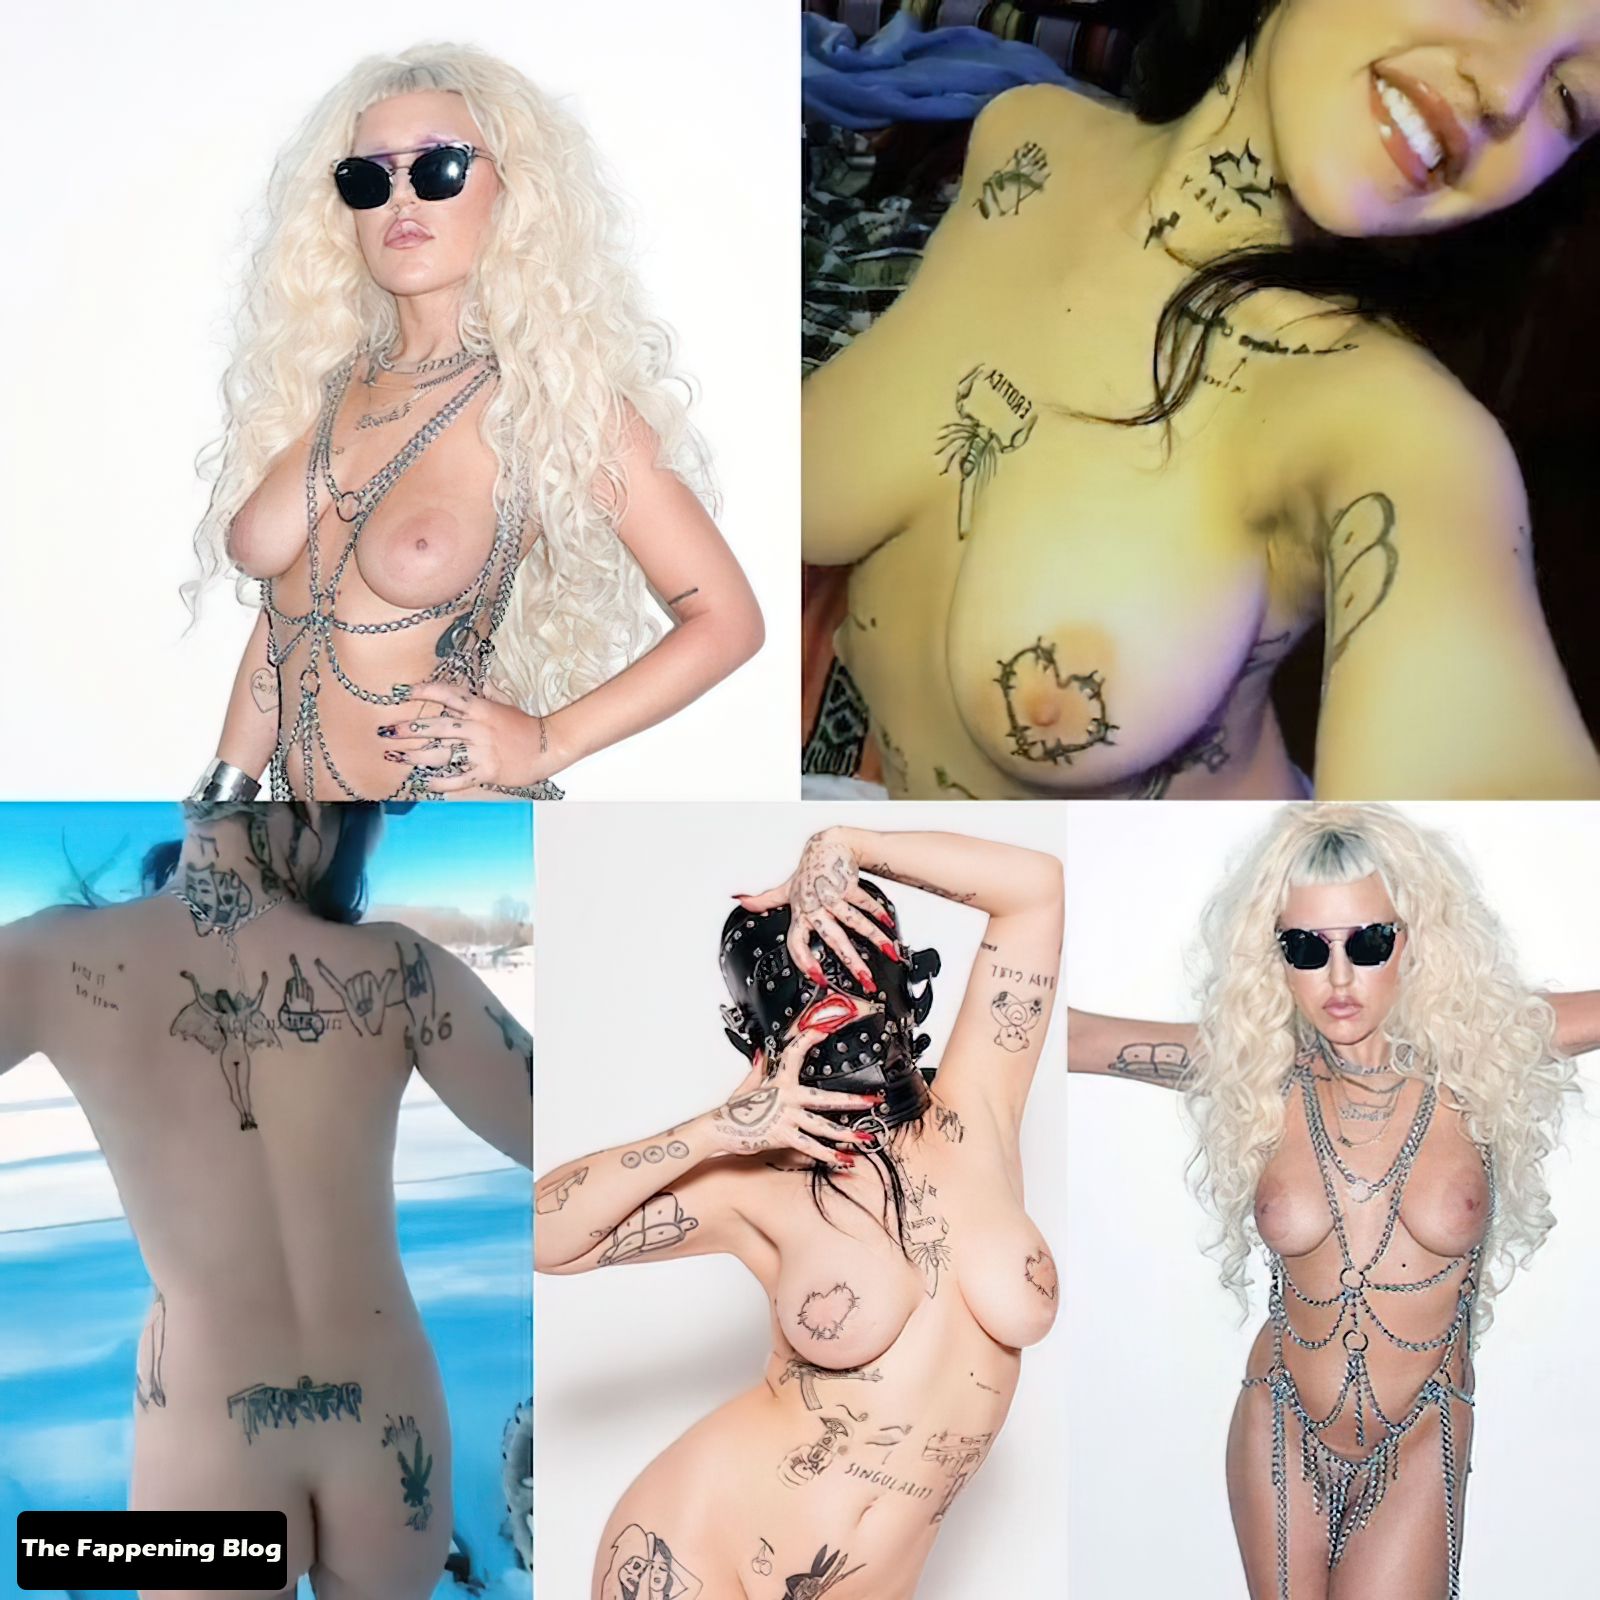 Brooke-Candy-Nude-Photo-Collection-10-thefappeningblog.com.jpg.